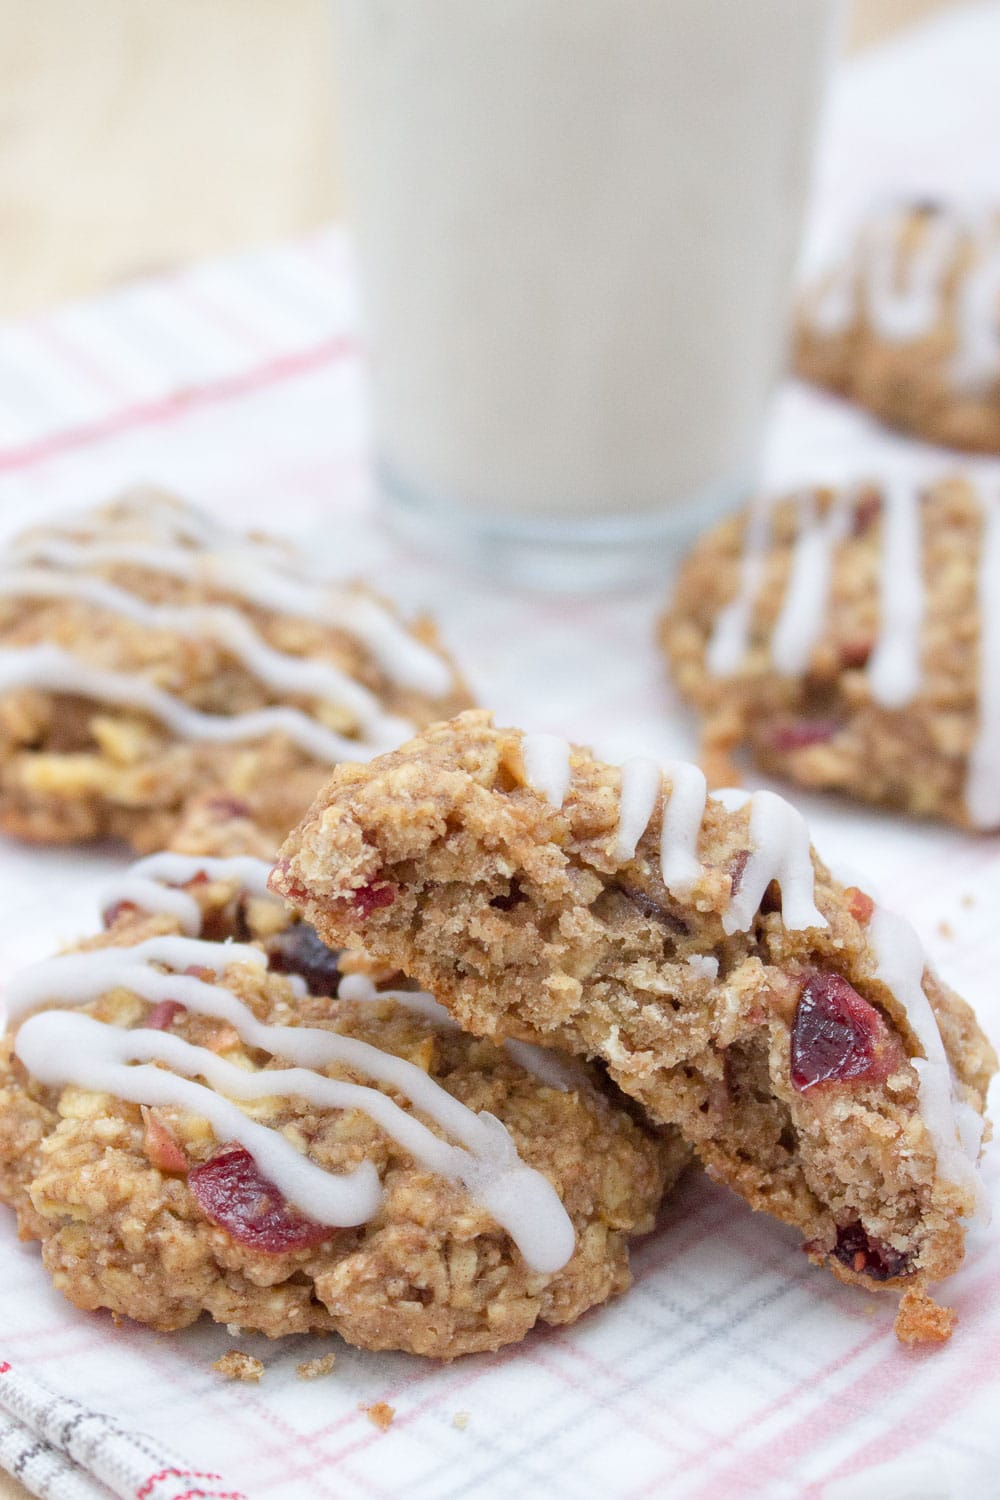 Pleasantly fragrant, soft and chewy these Apple Cinnamon Oatmeal Cookies are the perfect high-fiber breakfast cookies ready in 20 minutes. They’re very nutritious, made with all healthy ingredients and contain no refined sugars. CLICK to grab the recipe or PIN for later!